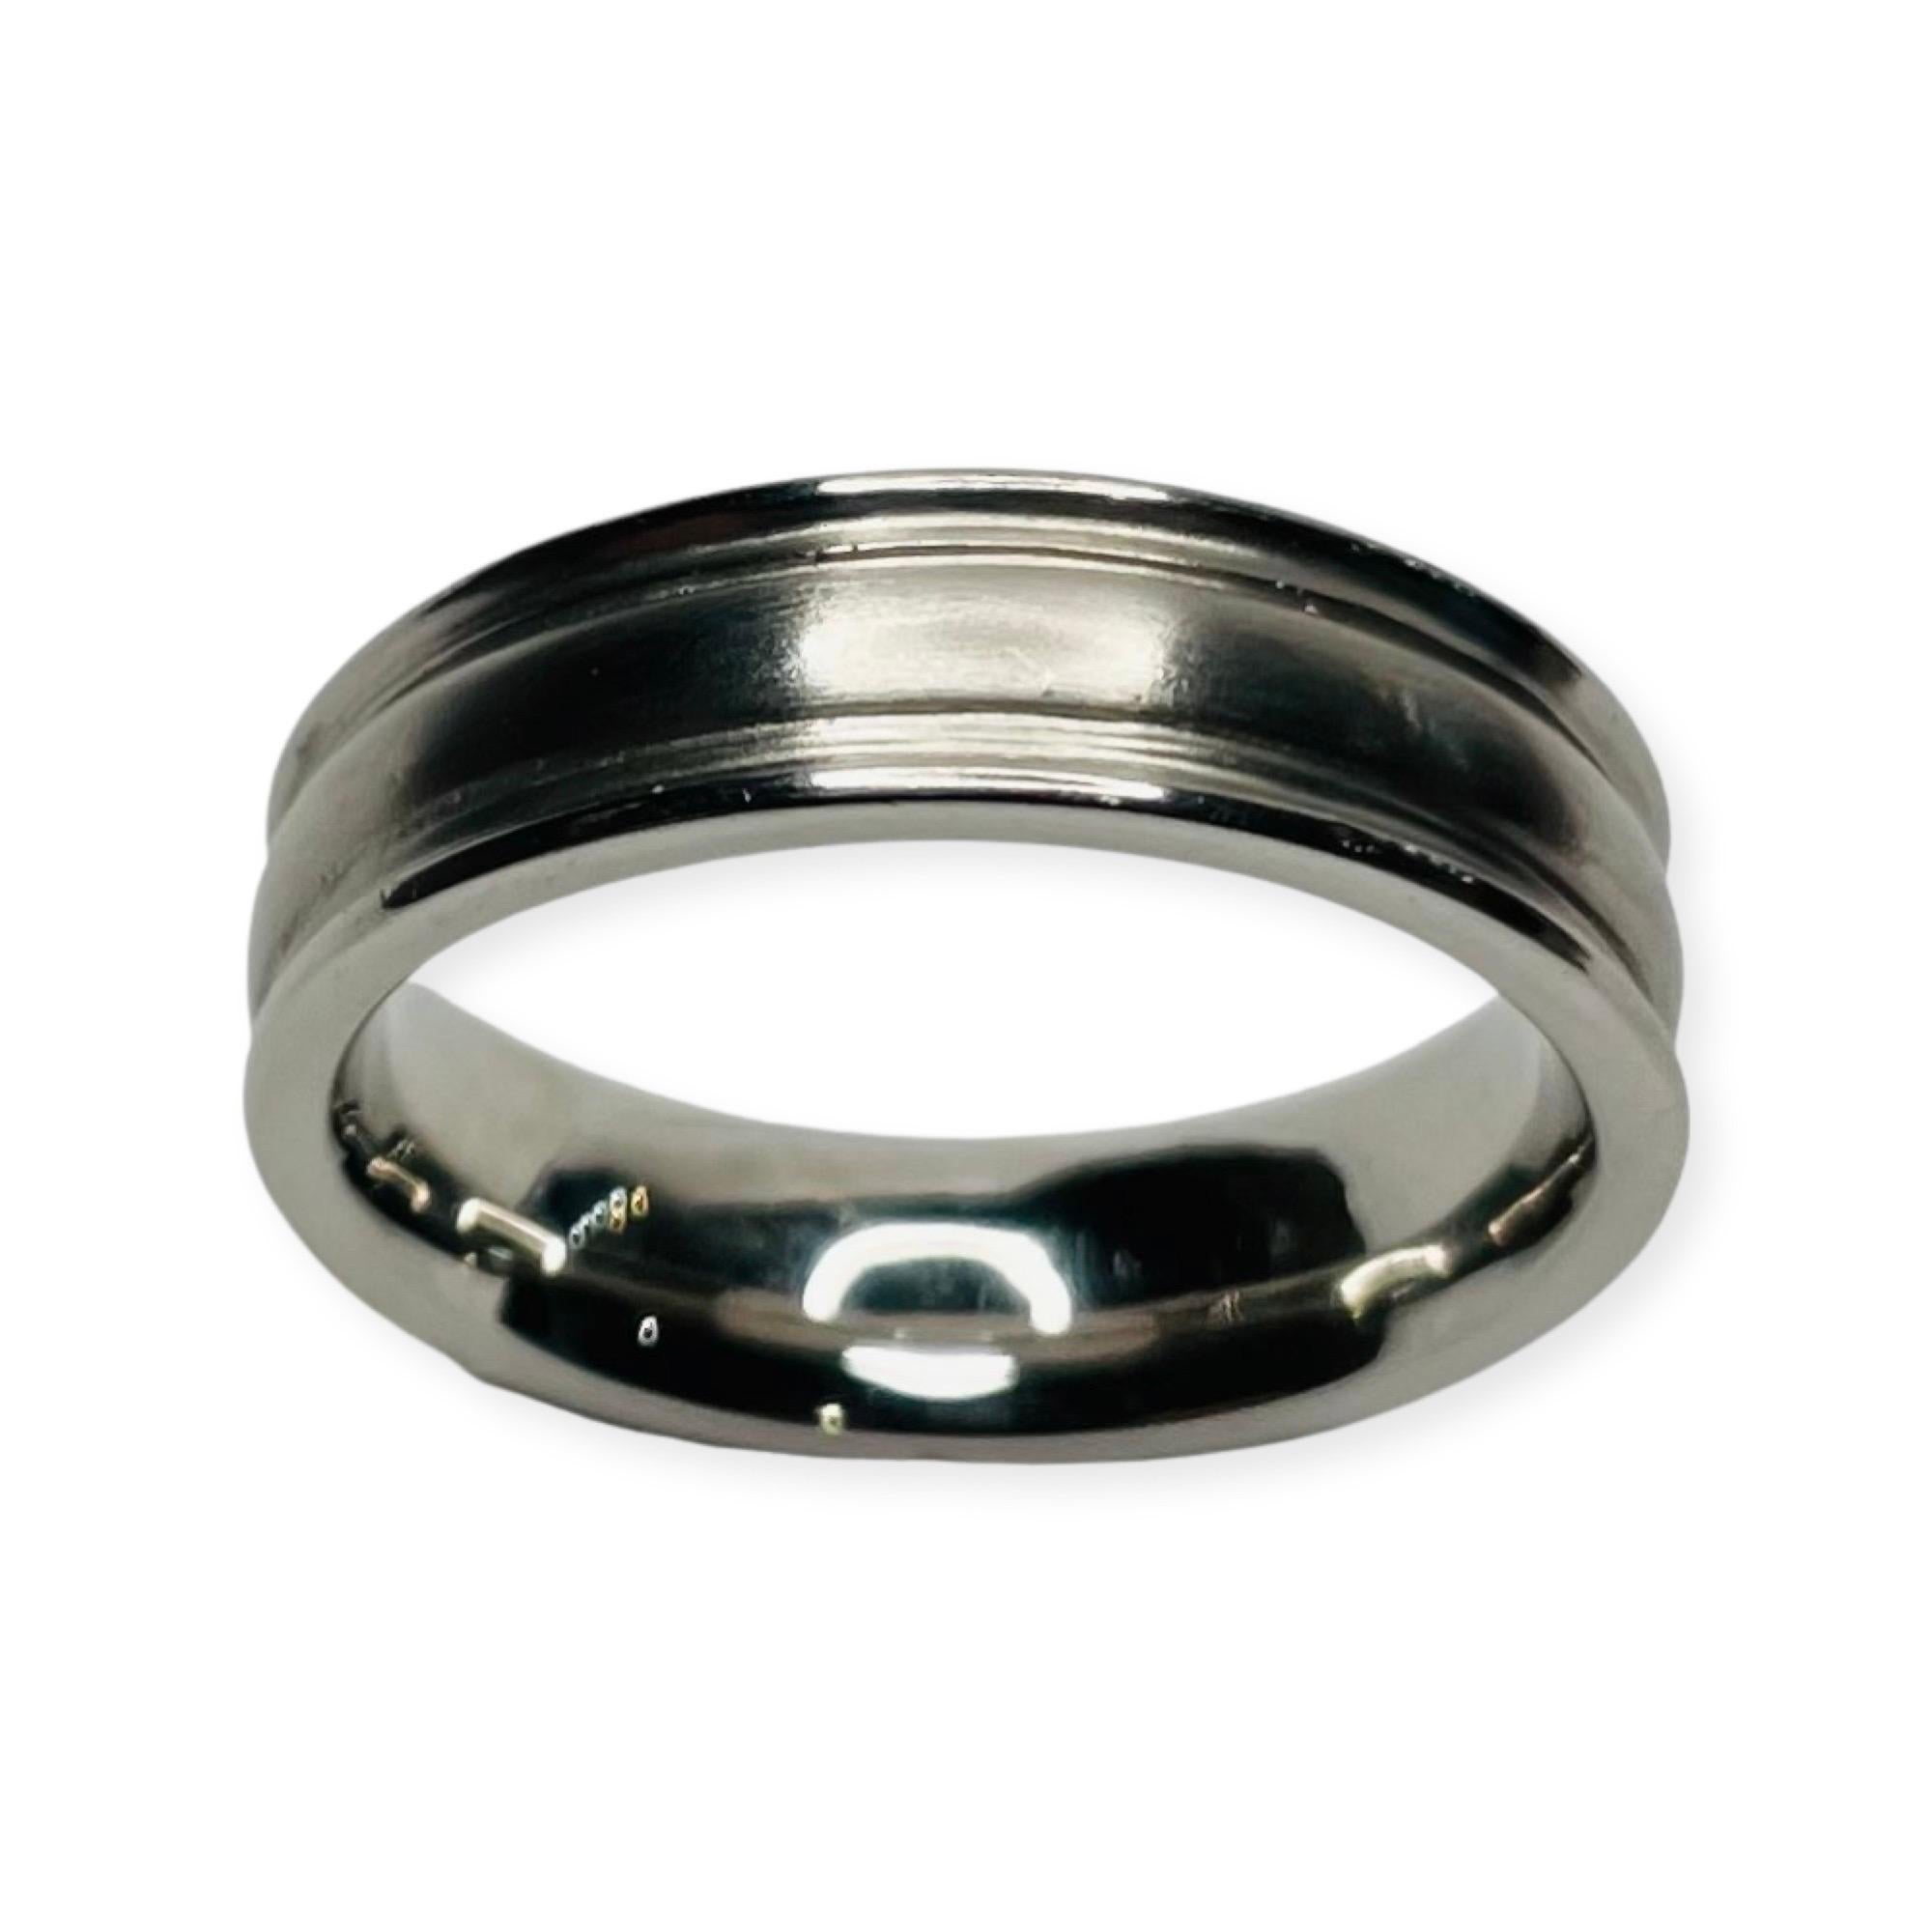 Rudolf Erdel Platinum Wedding Band Hallmarked Plat 950 and Trademarked OED c RE for Rudolf Erdel. The band is 6.4 mm wide.  It is a  comfort fit.  Finger size 10.25 100-100-212